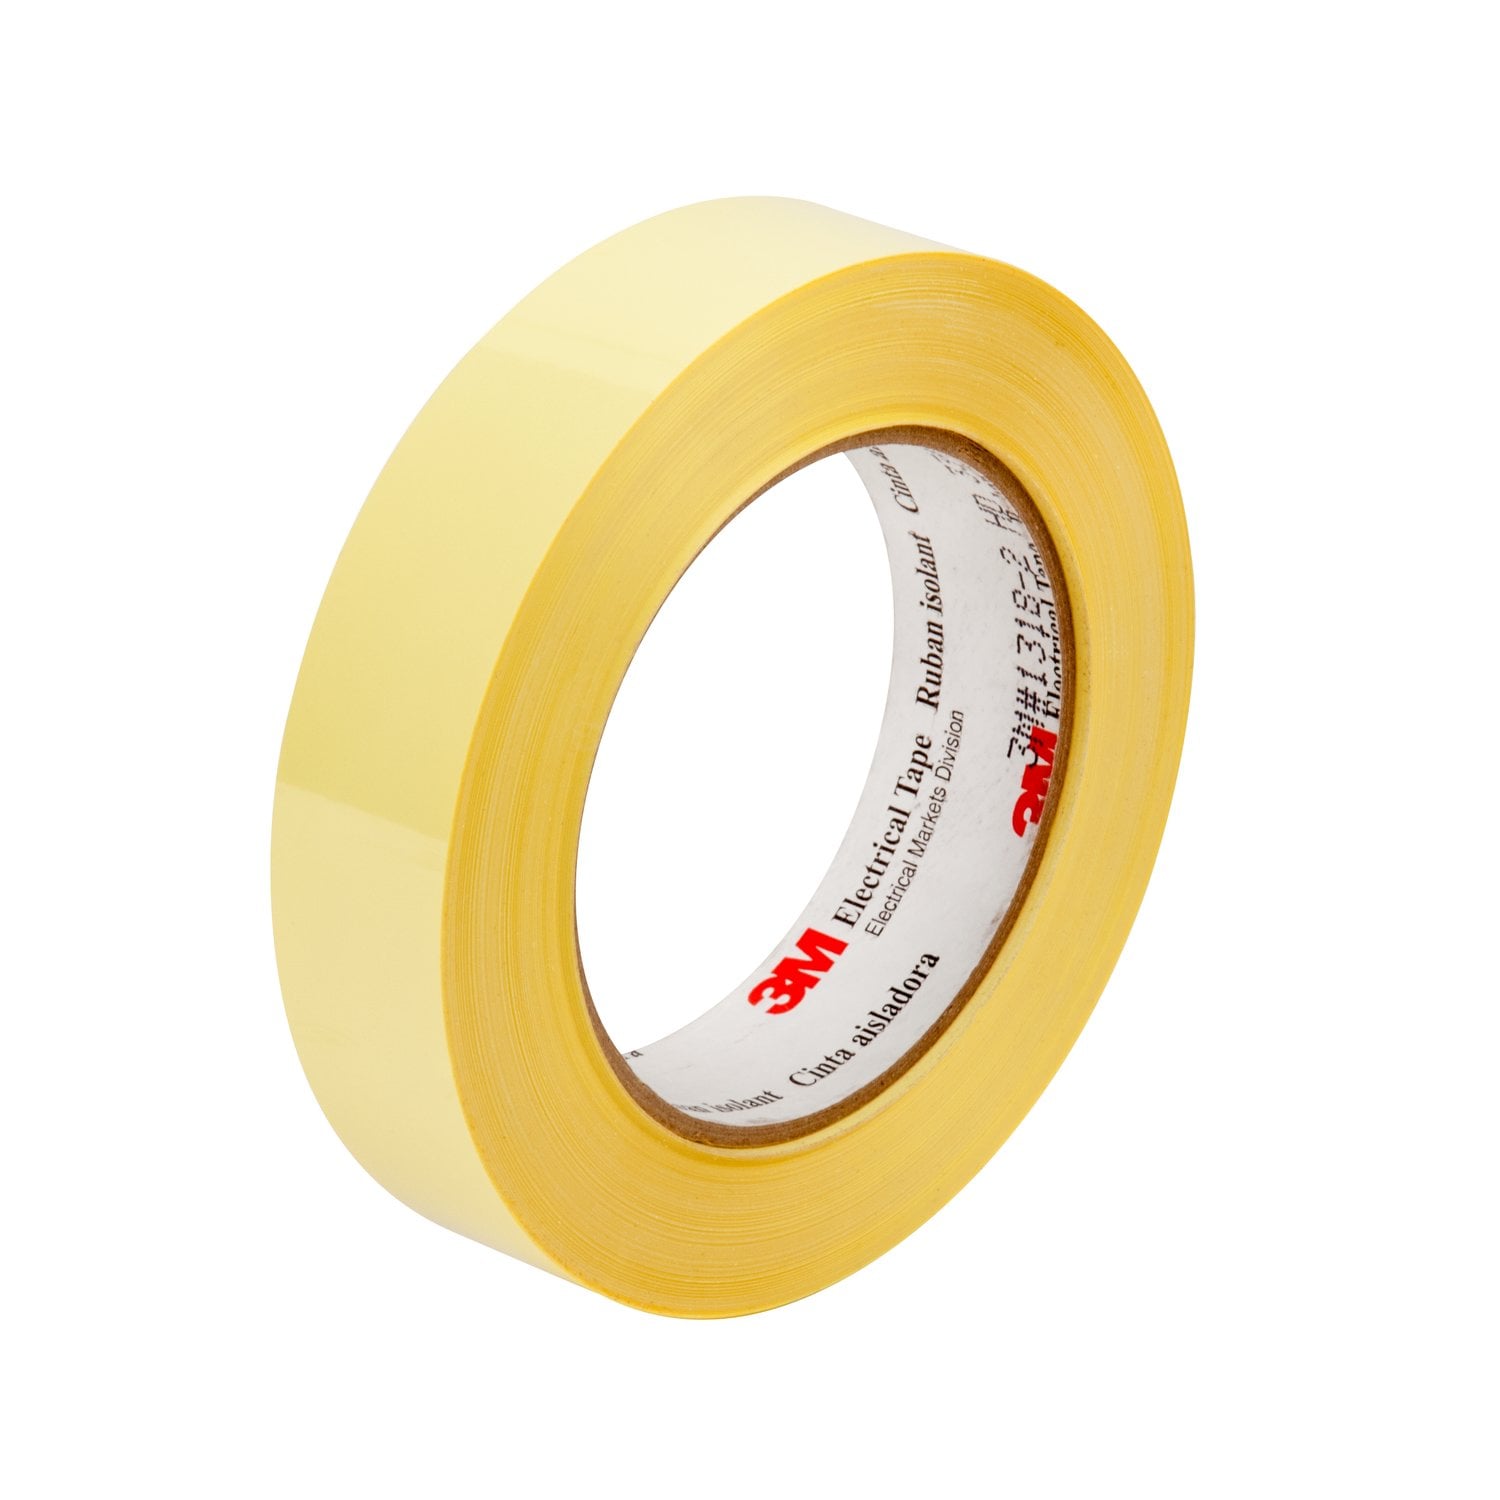 7010397214 - 3M Polyester Film Electrical Tape 1350F-1, 25M, Yellow, 24 in x 72 yd,
3-in paper core, Log roll, 1 Roll/Case